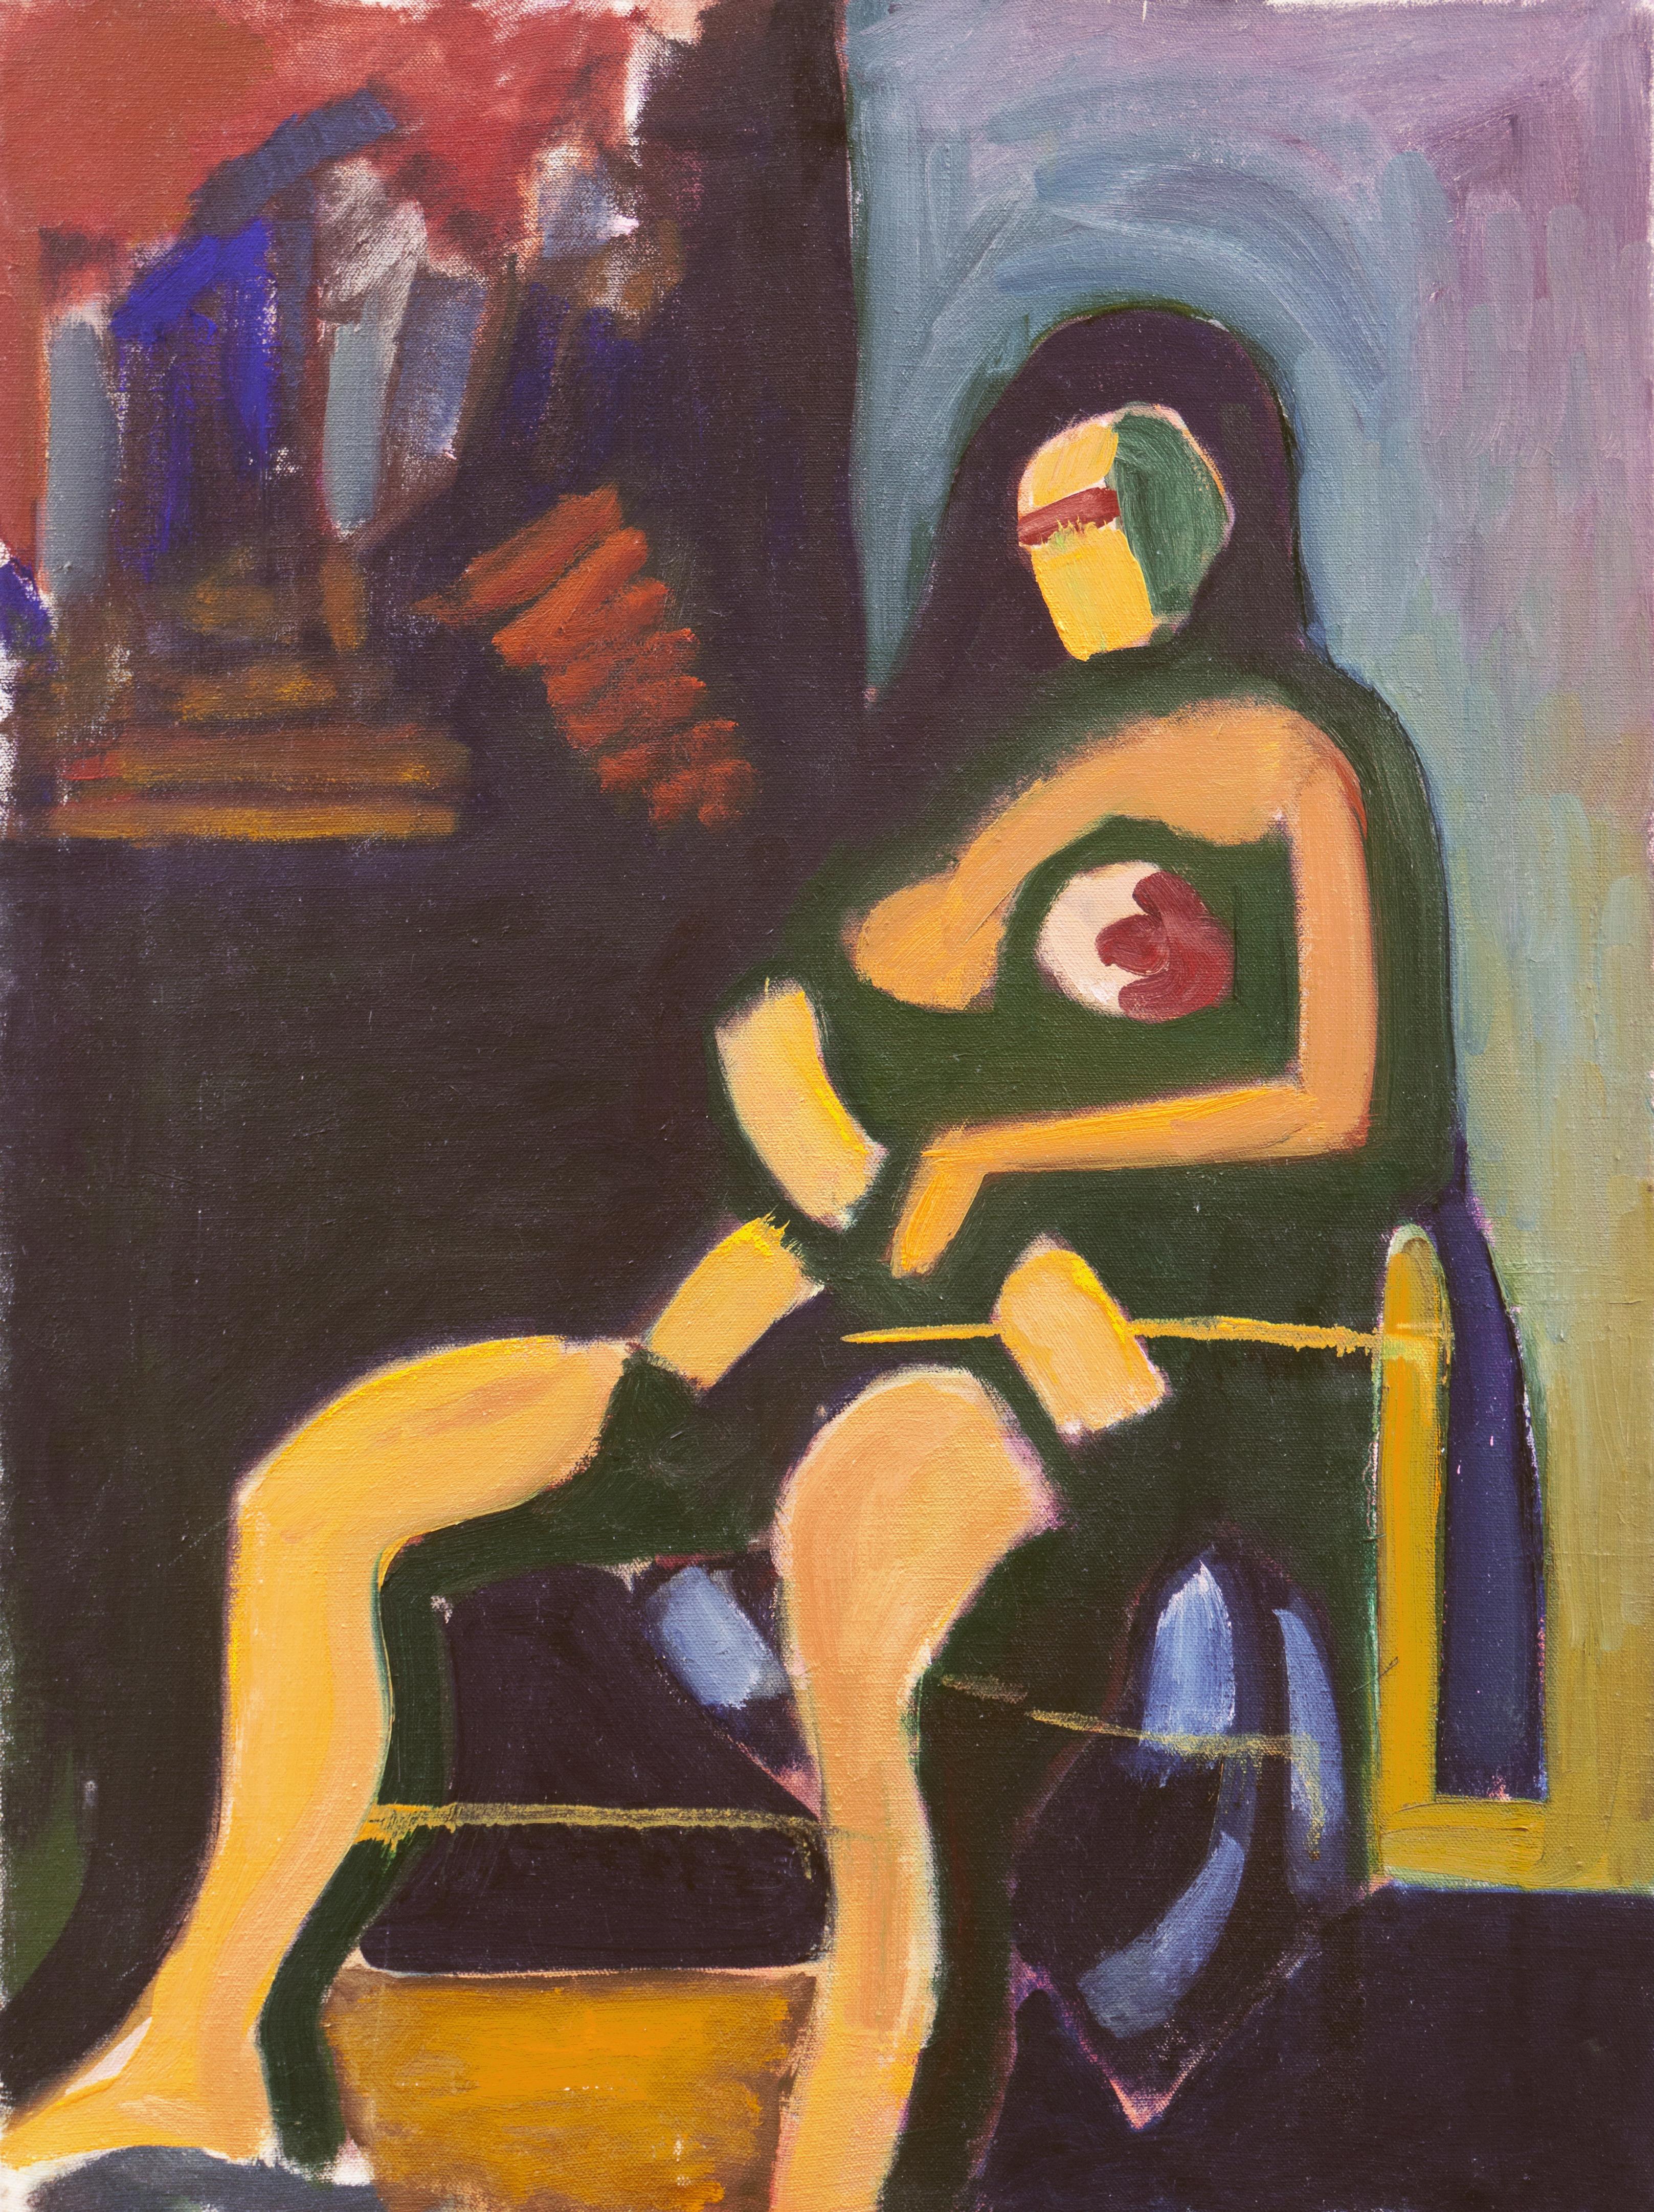 Angelo Ippolito Figurative Painting - 'Seated Woman', Modernist Figural oil by New York Expressionist artist, MOMA